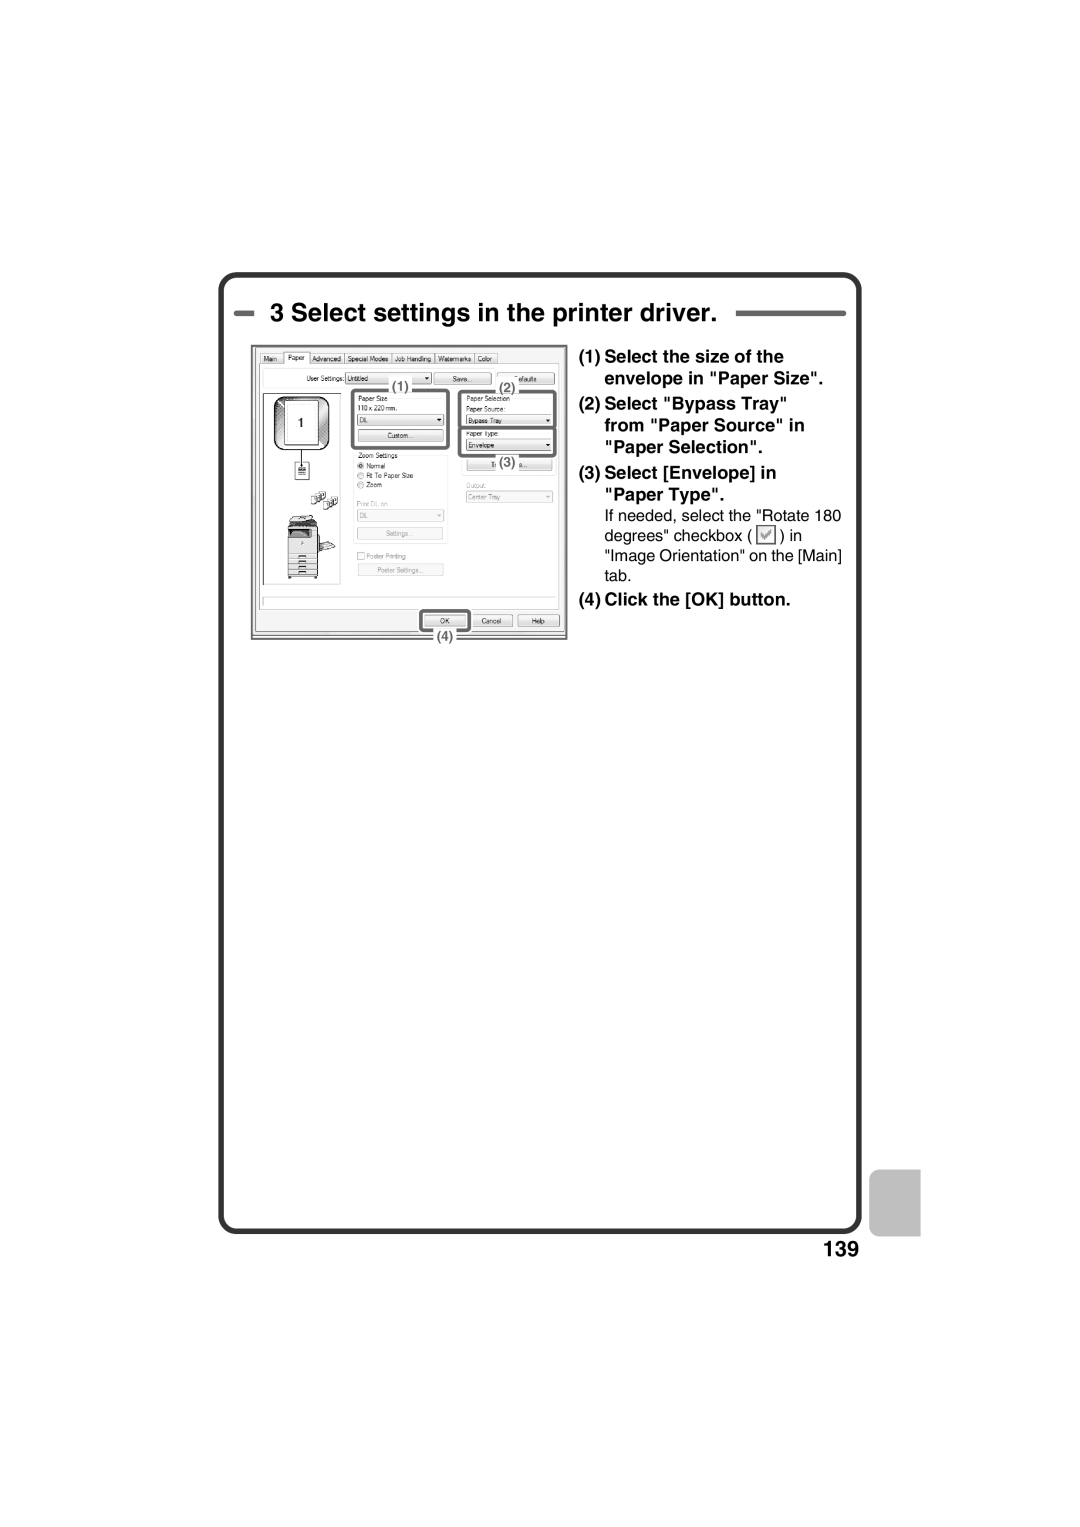 Sharp MX-C381 Select settings in the printer driver, Select the size of the envelope in Paper Size, Click the OK button 